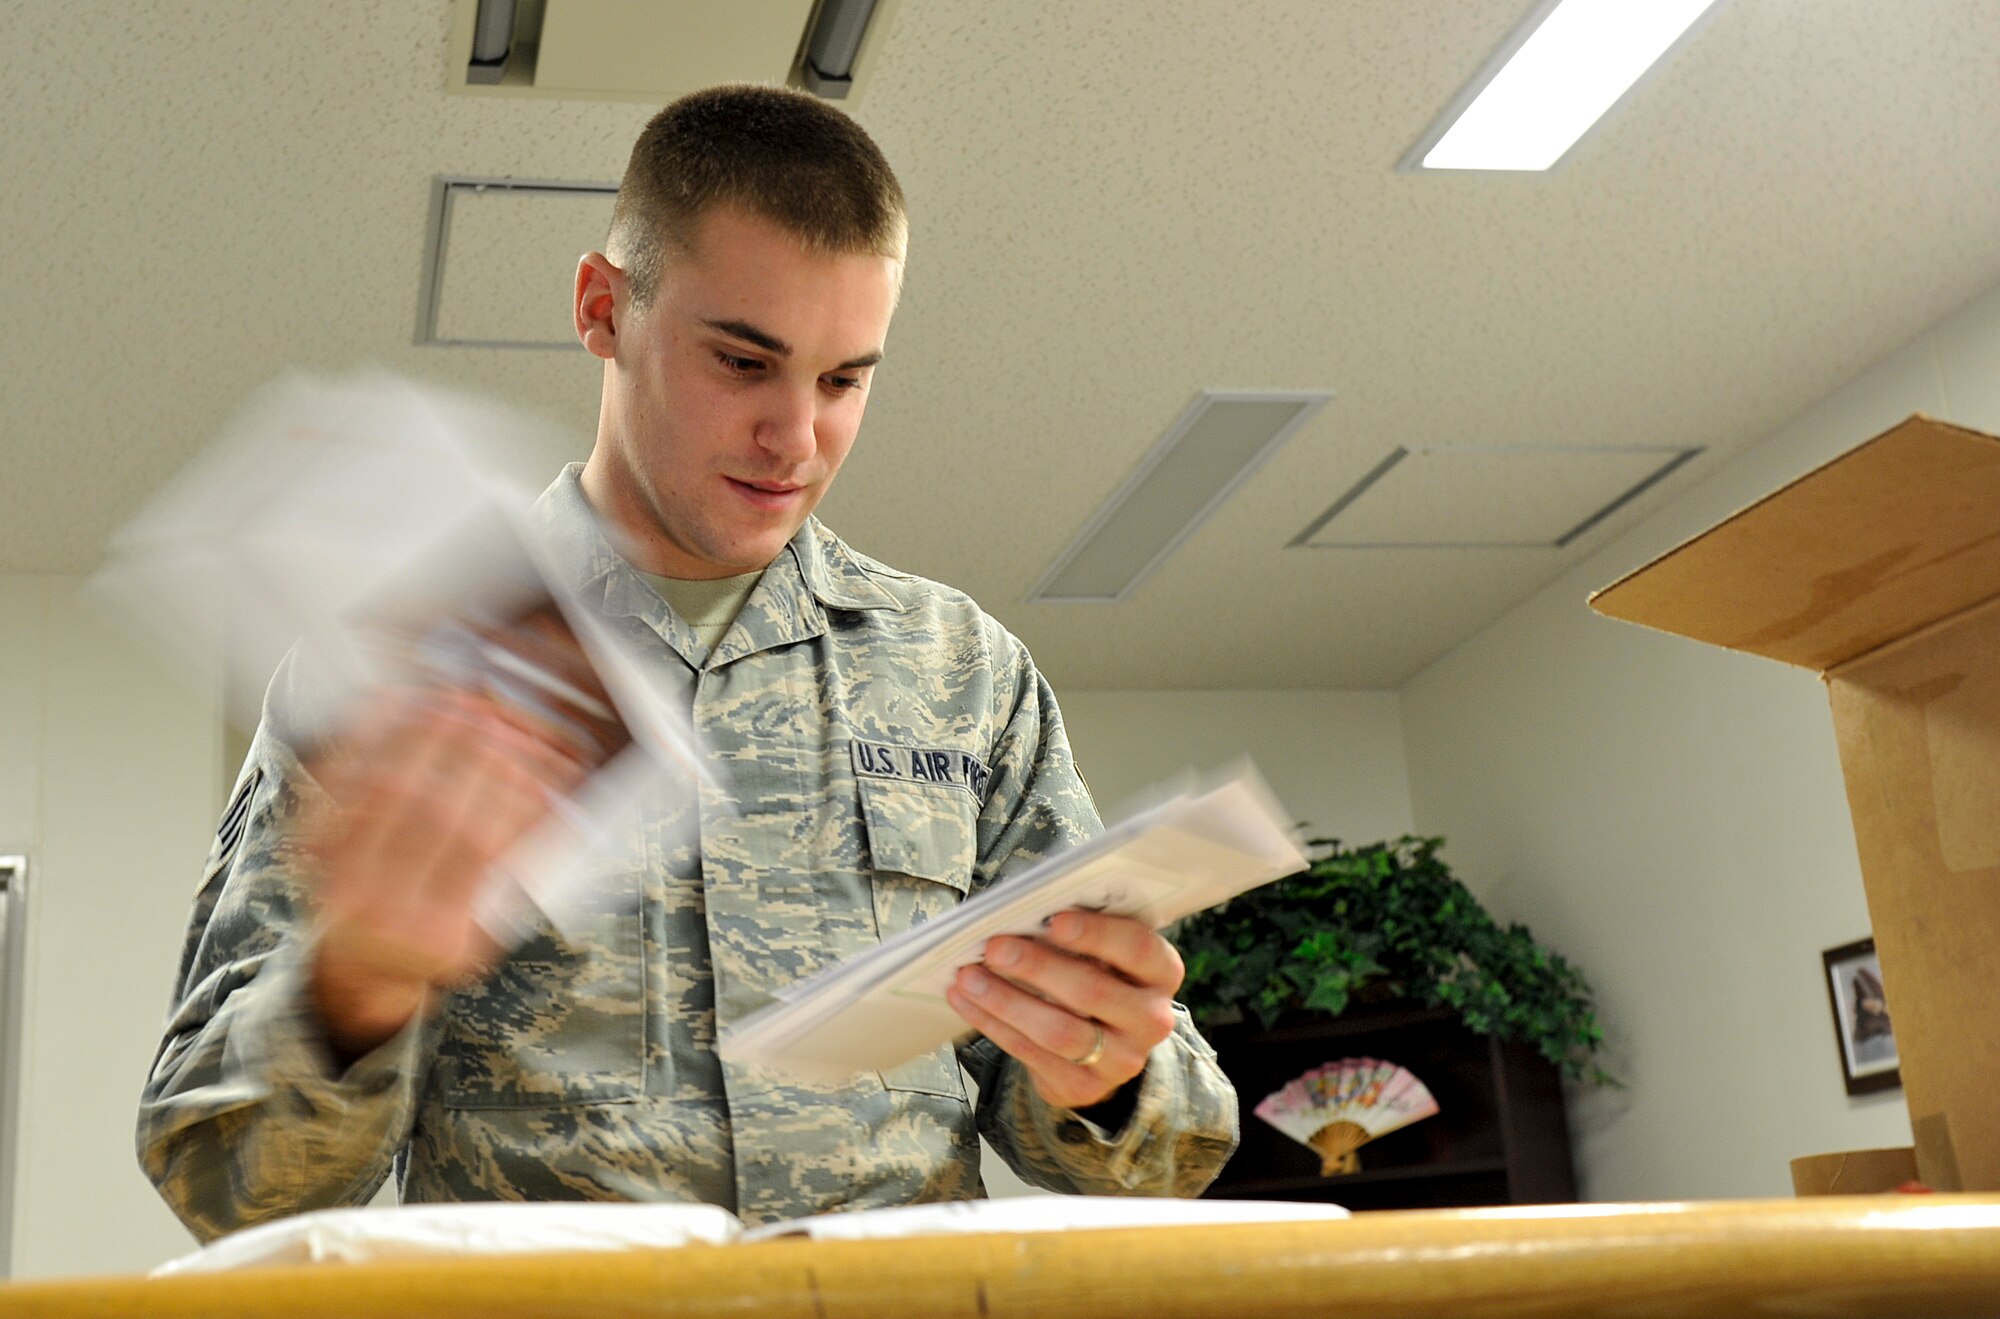 U.S. Air Force Senior Airman Jacob Wright, 373rd Support Squadron, knowledge operations management technician, sorts through mail at Misawa Air Base, Japan, Dec. 12, 2014. Among Wright’s normal operations of administrative support, he also handles incoming mail and parcels within his squadron. (U.S. Air Force photo by Airman 1st Class Patrick S. Ciccarone/Released)